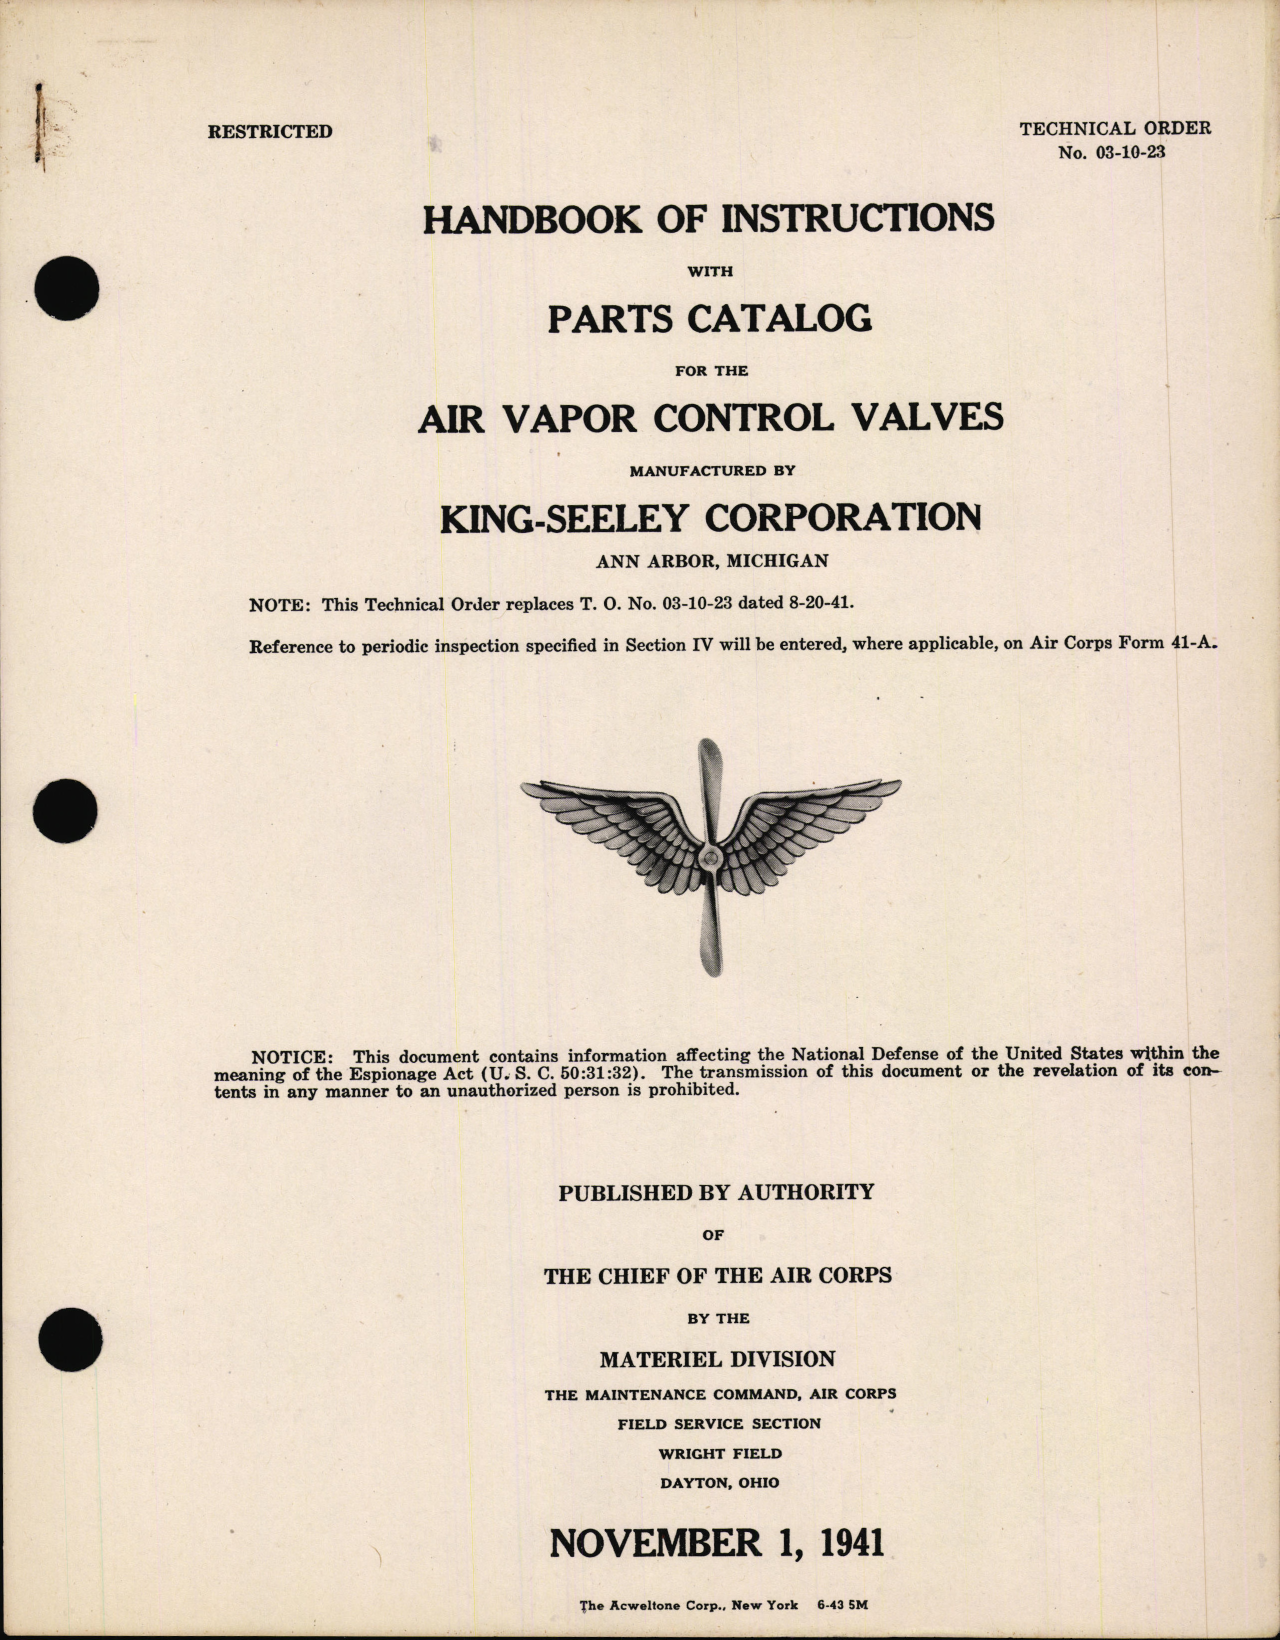 Sample page 1 from AirCorps Library document: Handbook of Instructions with Parts Catalog for Air Vapor Control Valves